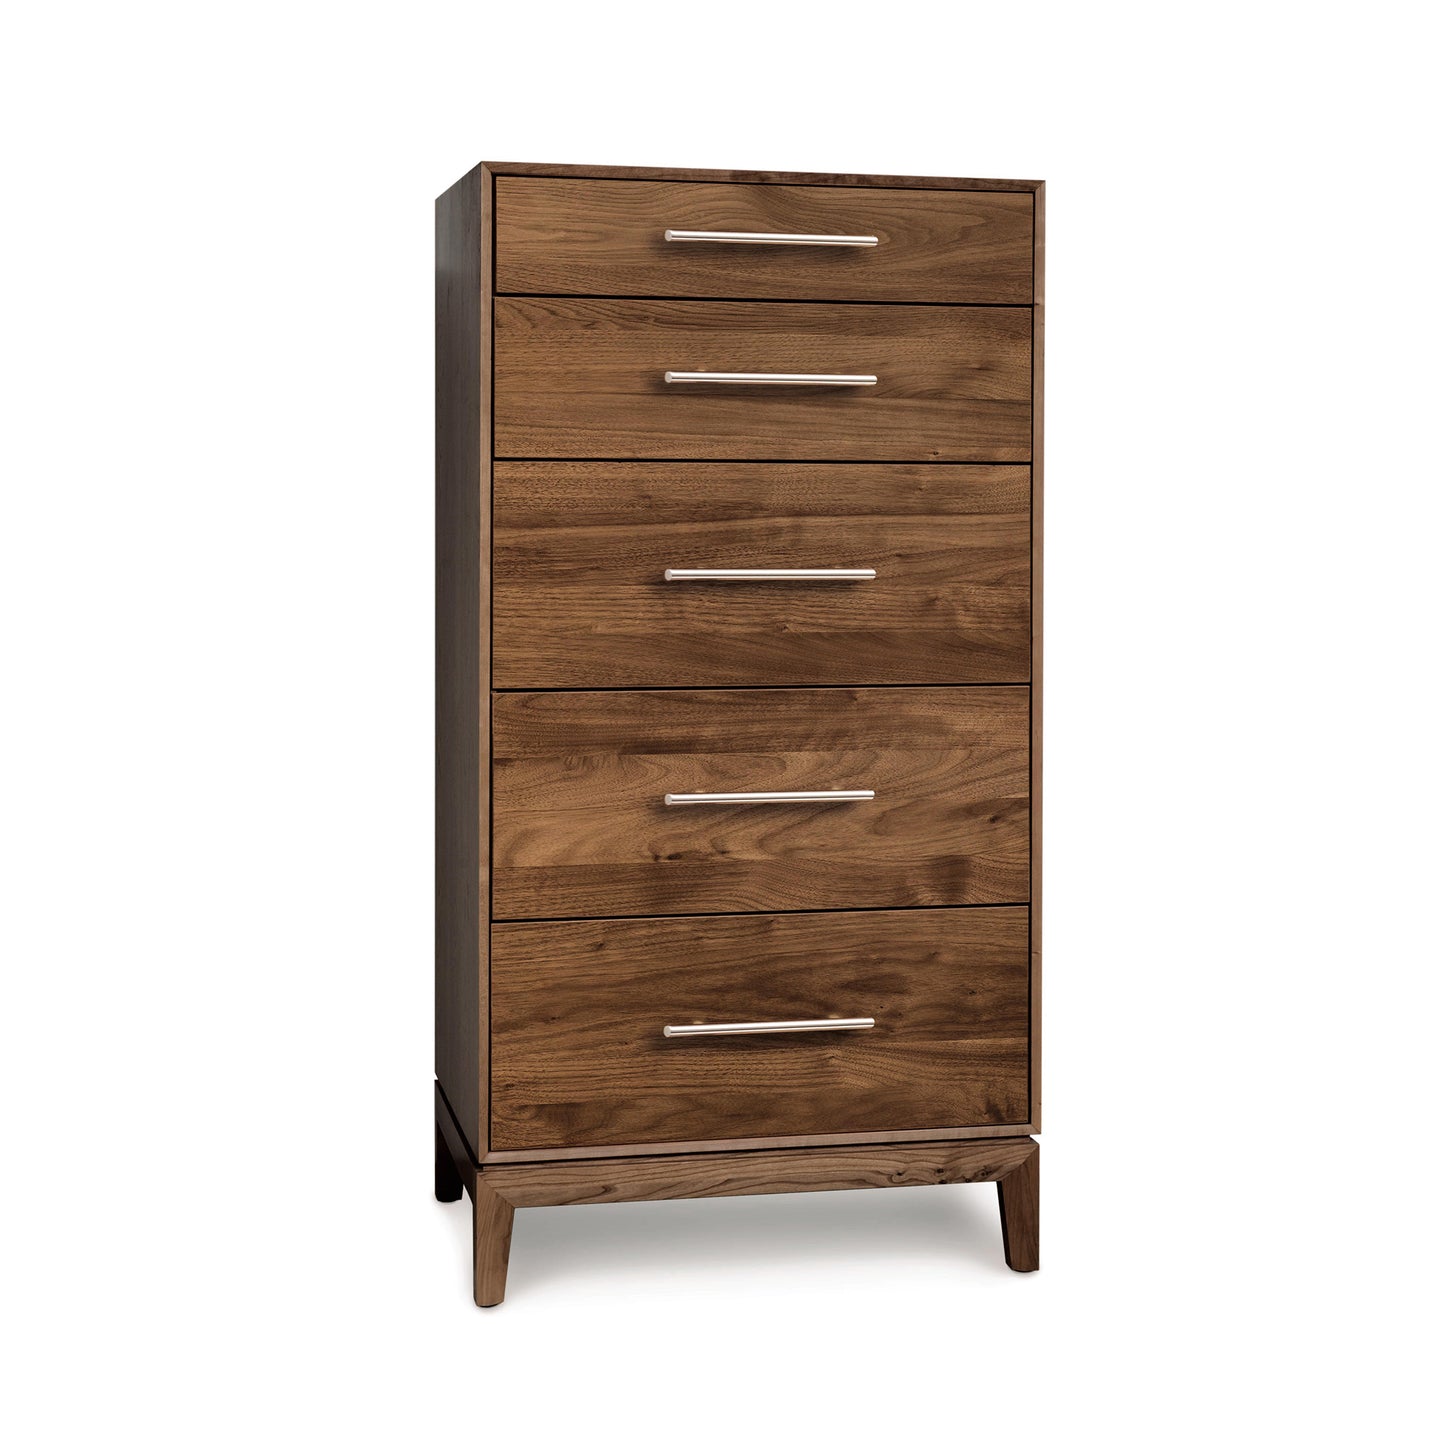 A solid natural wood Mansfield 5-Drawer Narrow Chest in the Arts and Crafts style with metal handles against a white background by Copeland Furniture.